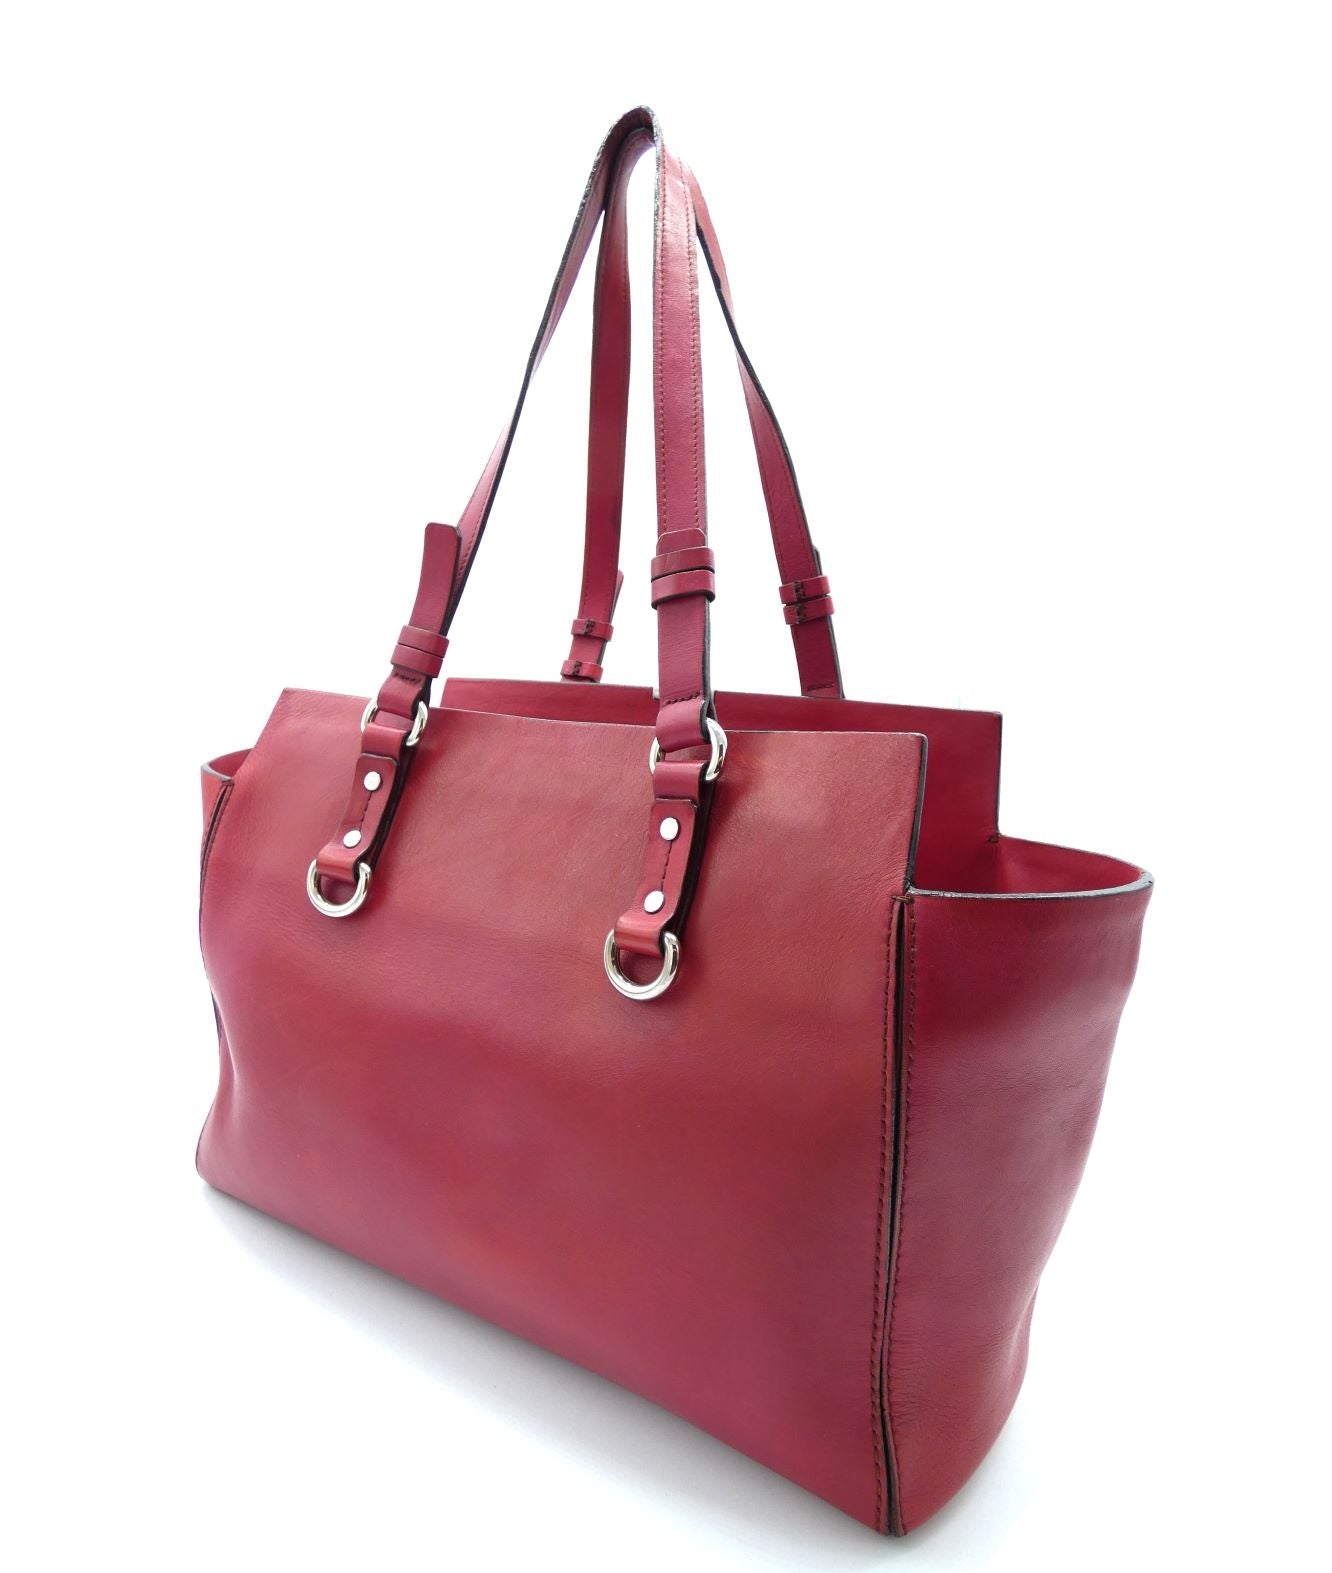 DSquared2 Red Leather Large Tote Bag DSquared2